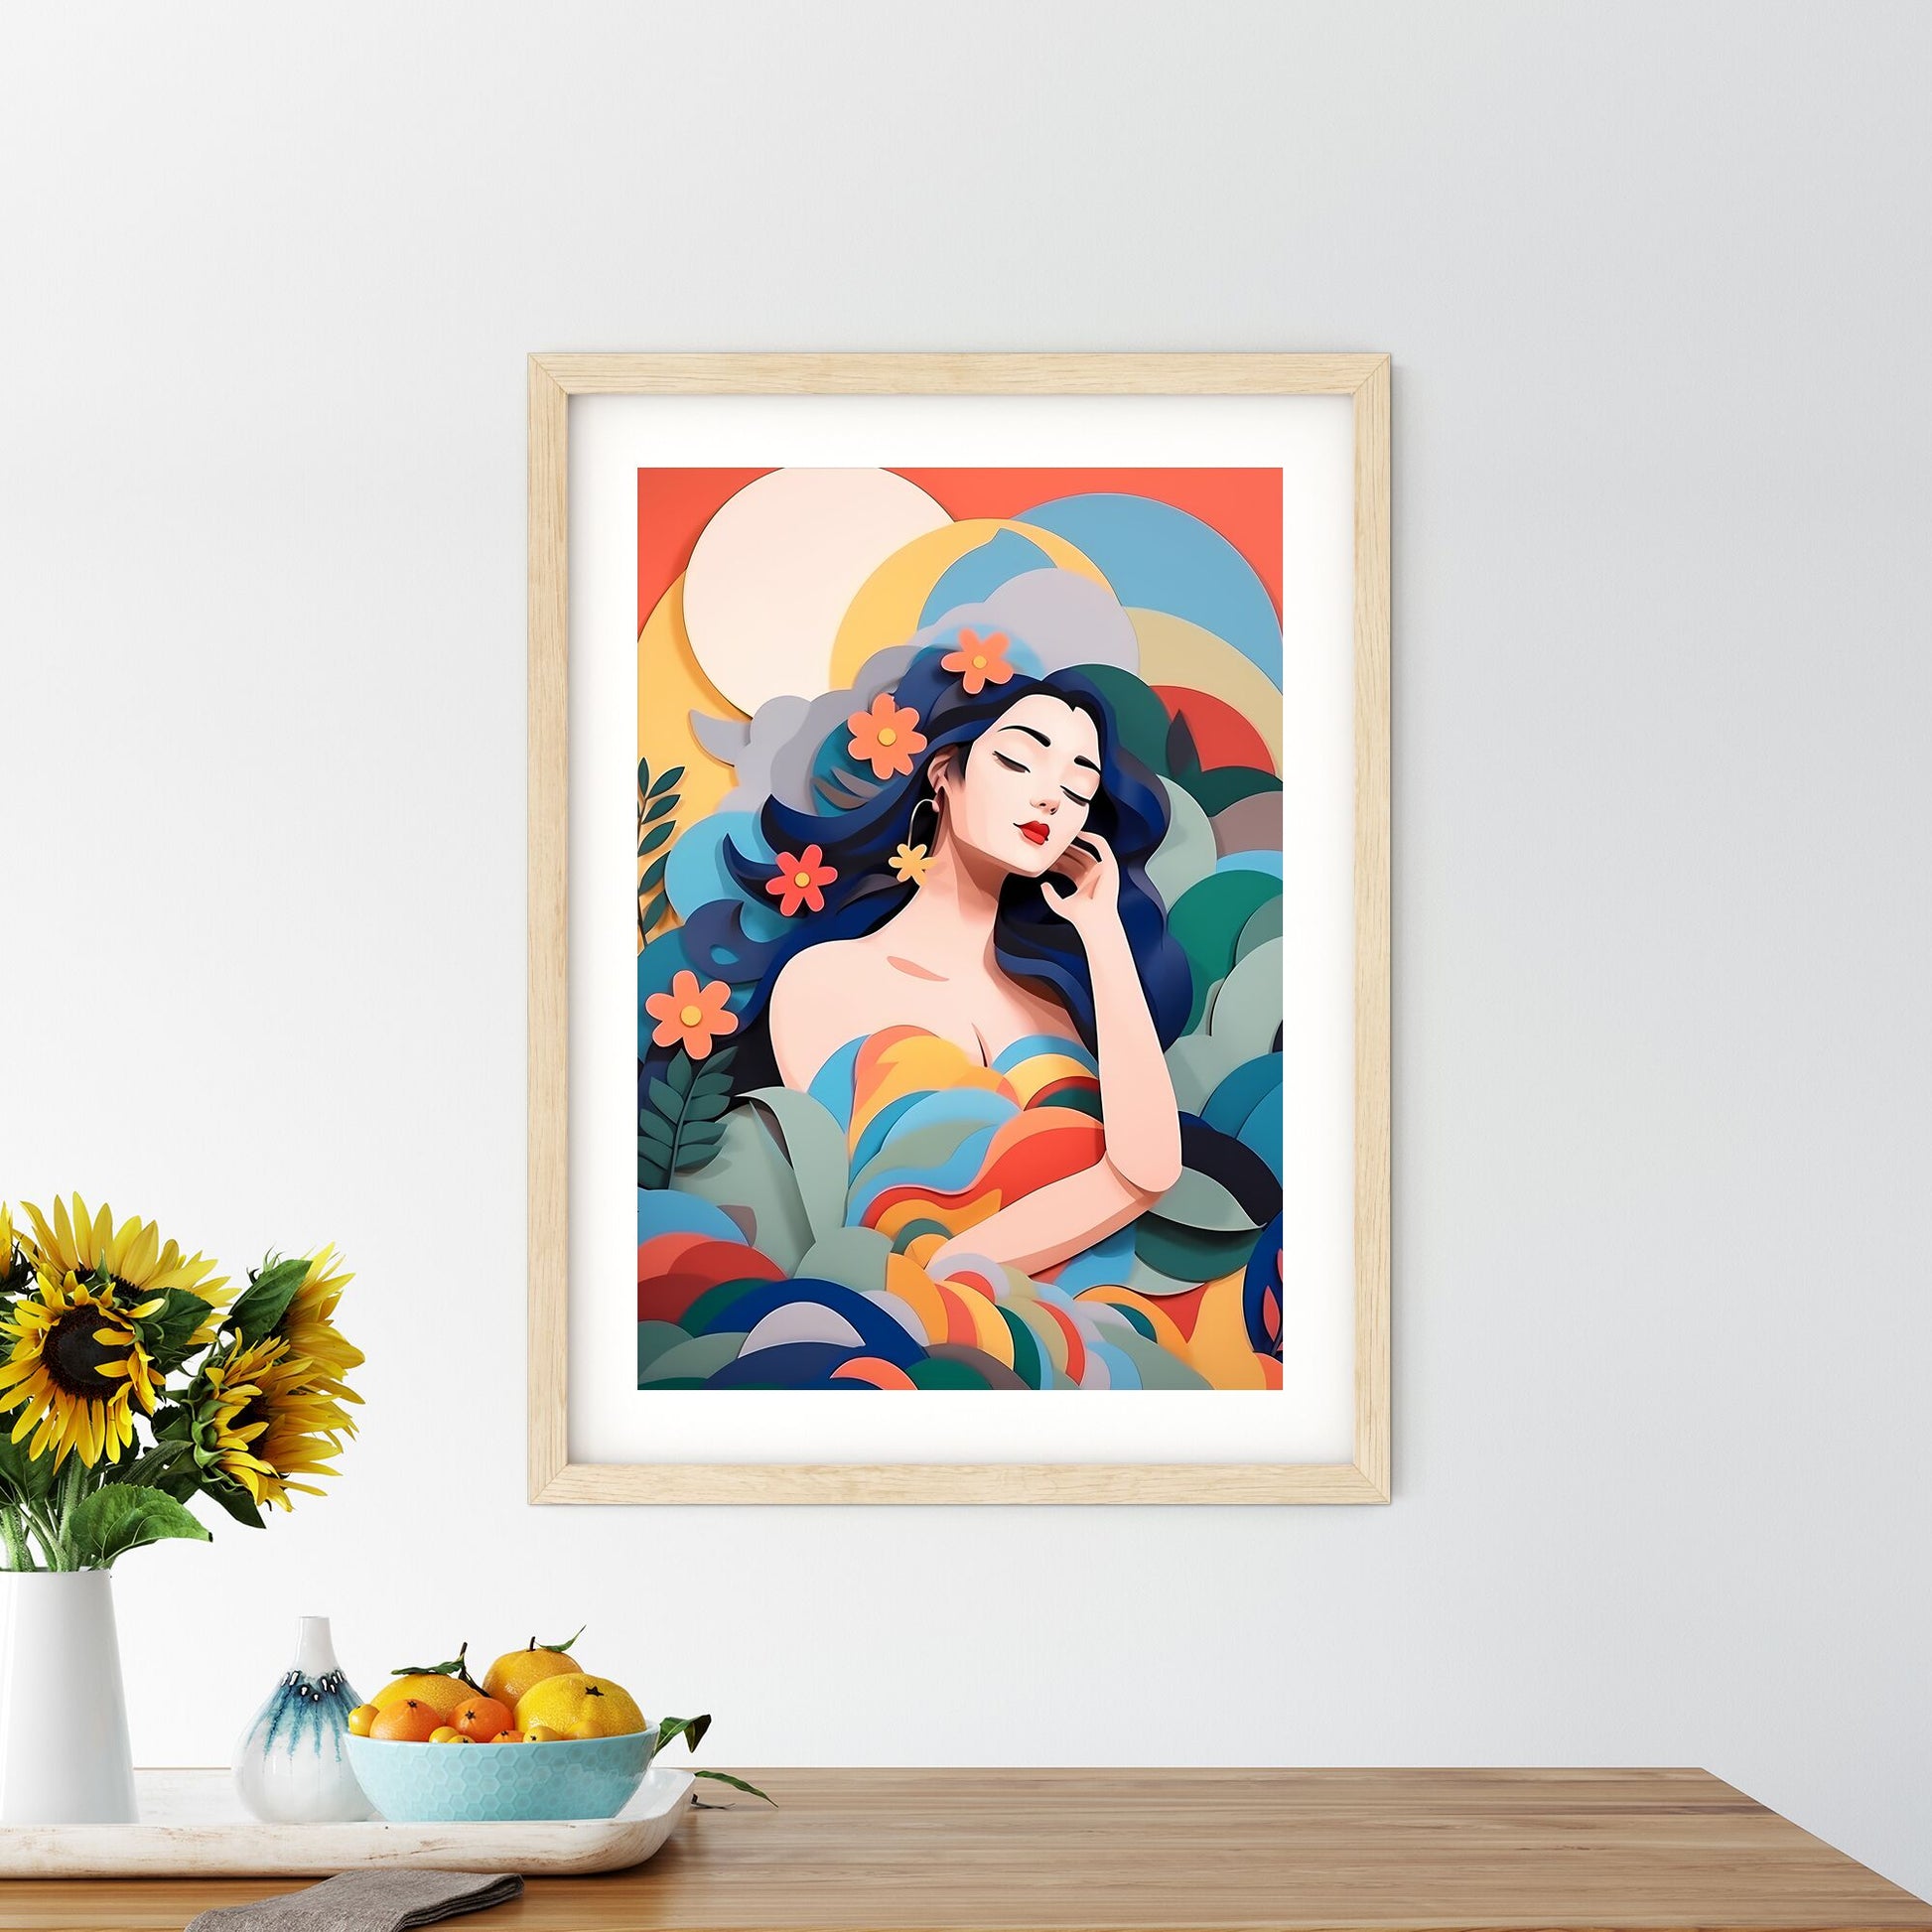 Woman With Blue Hair And Flowers In Her Hair Art Print Default Title